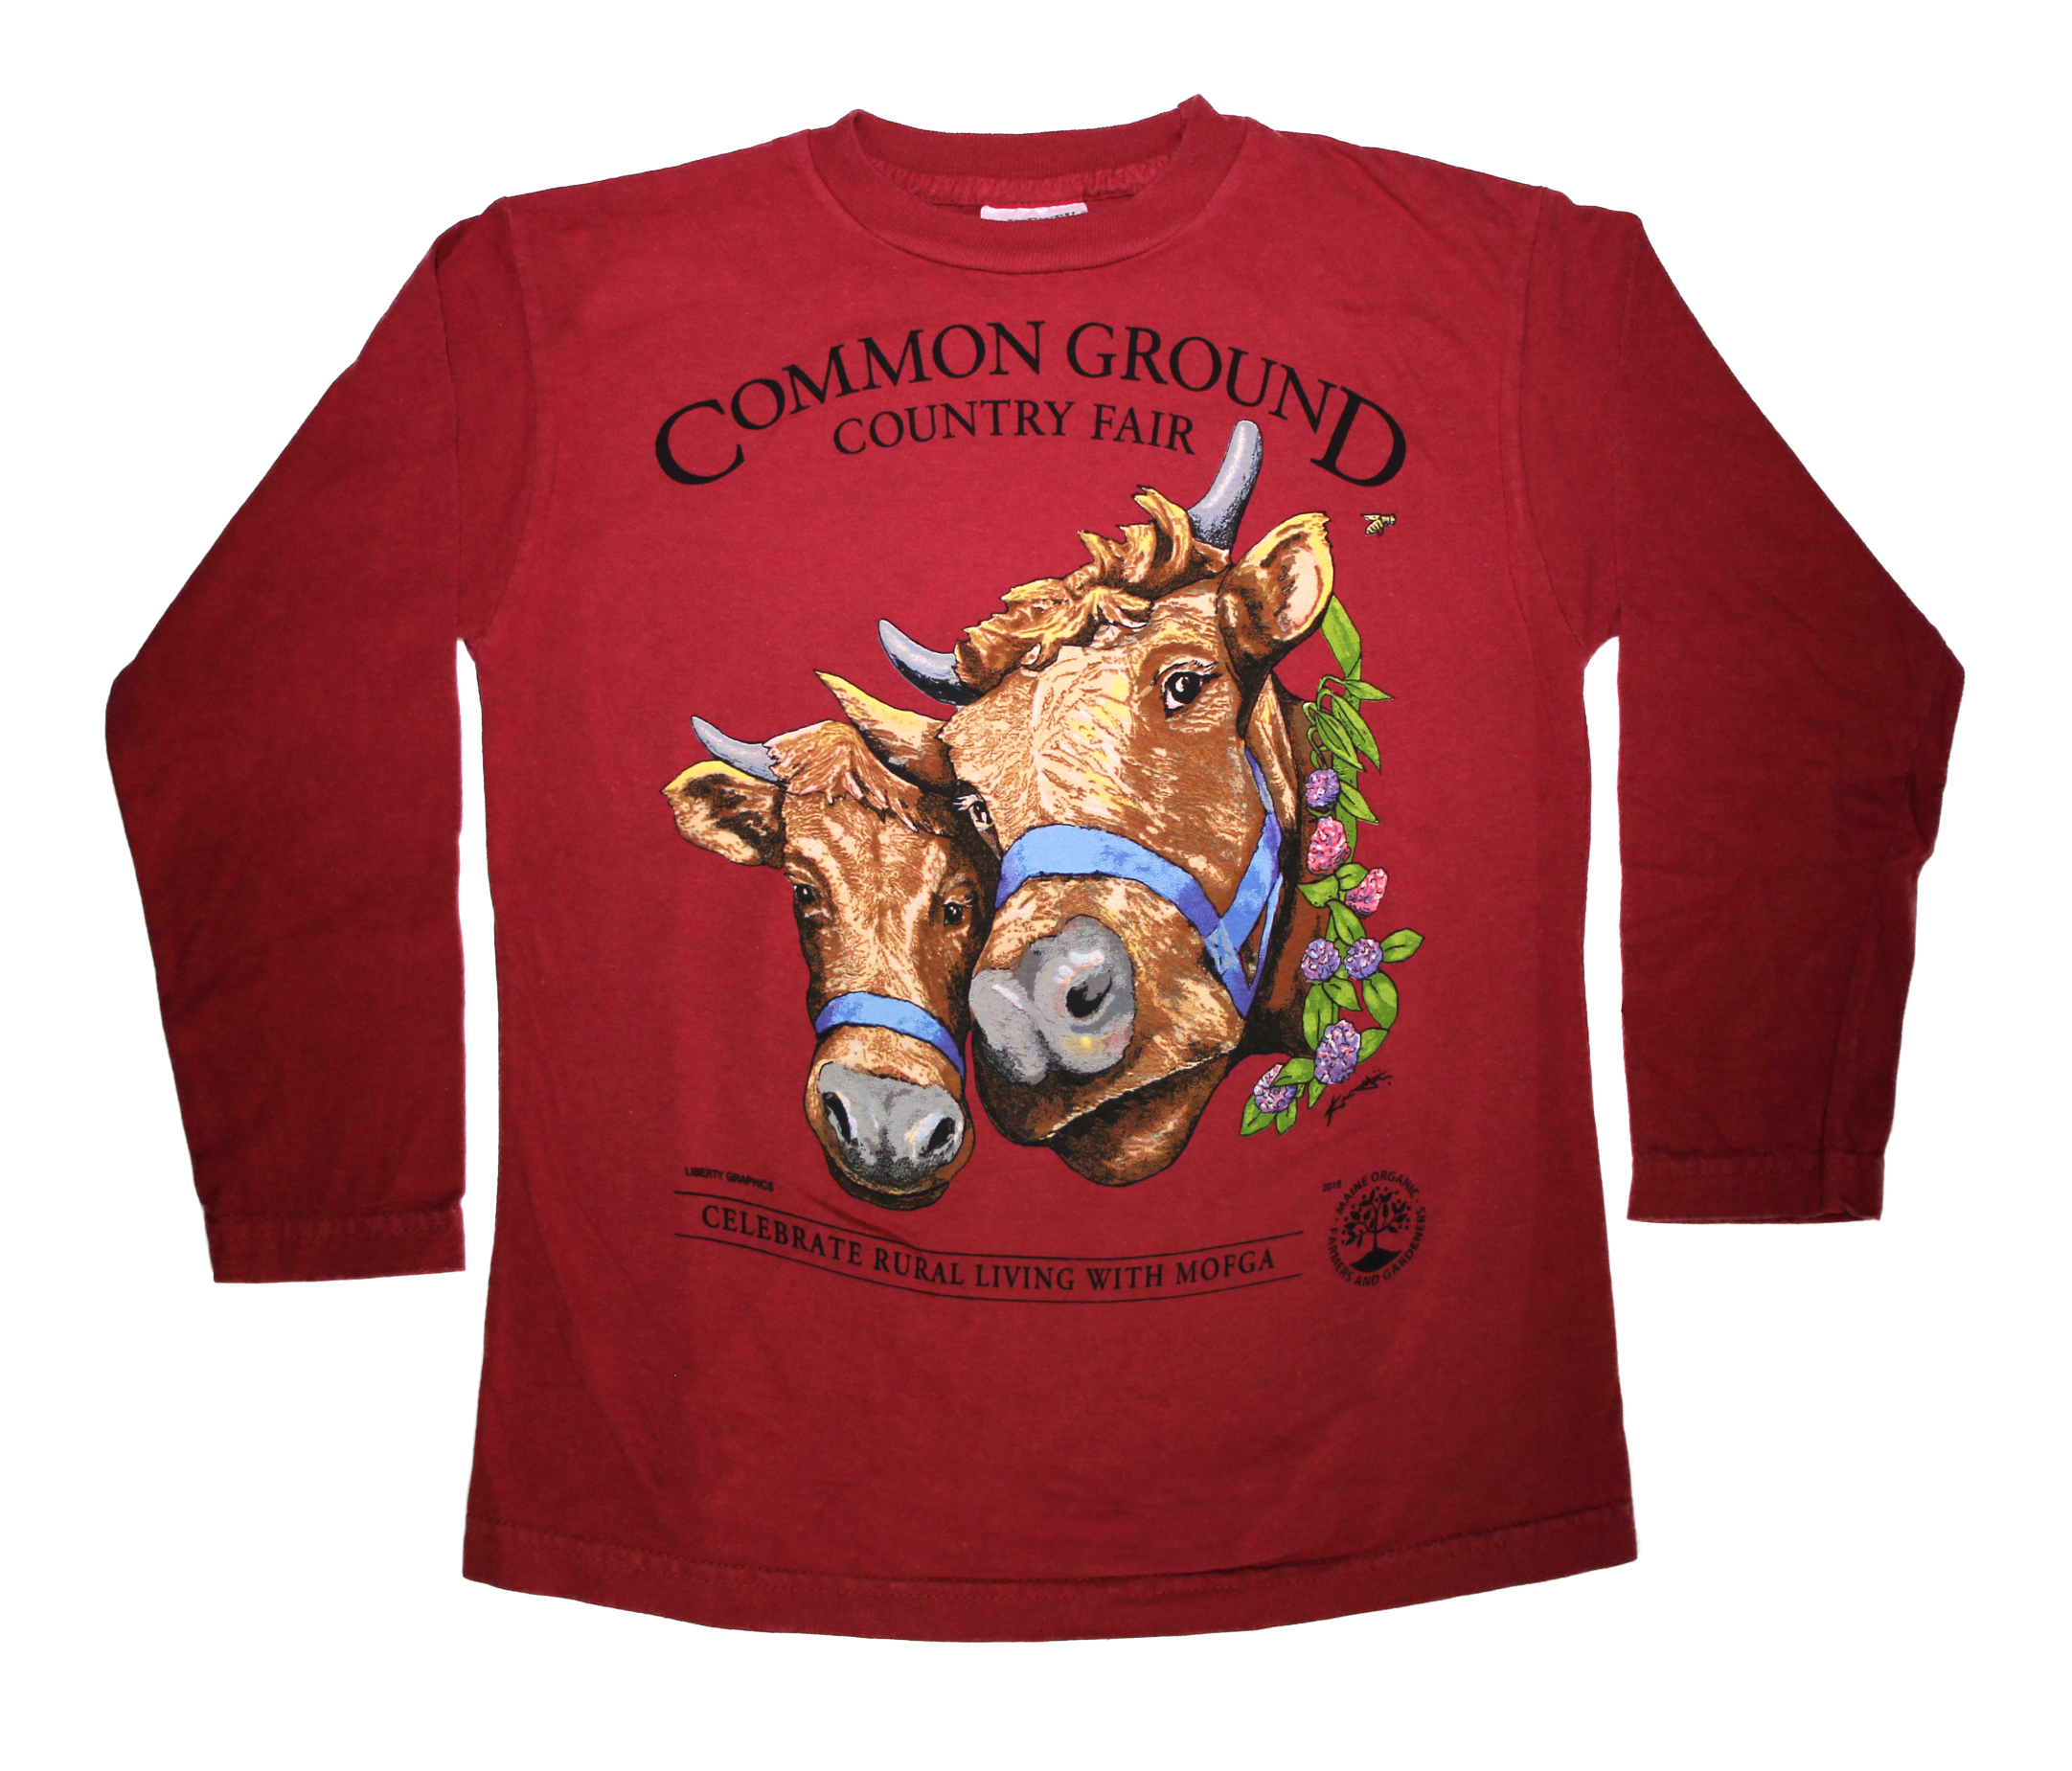 2019 Common Ground Country Fair Youth Long-sleeve T-shirt. Dexter Heifers design. Color red cedar a.k.a. dark red